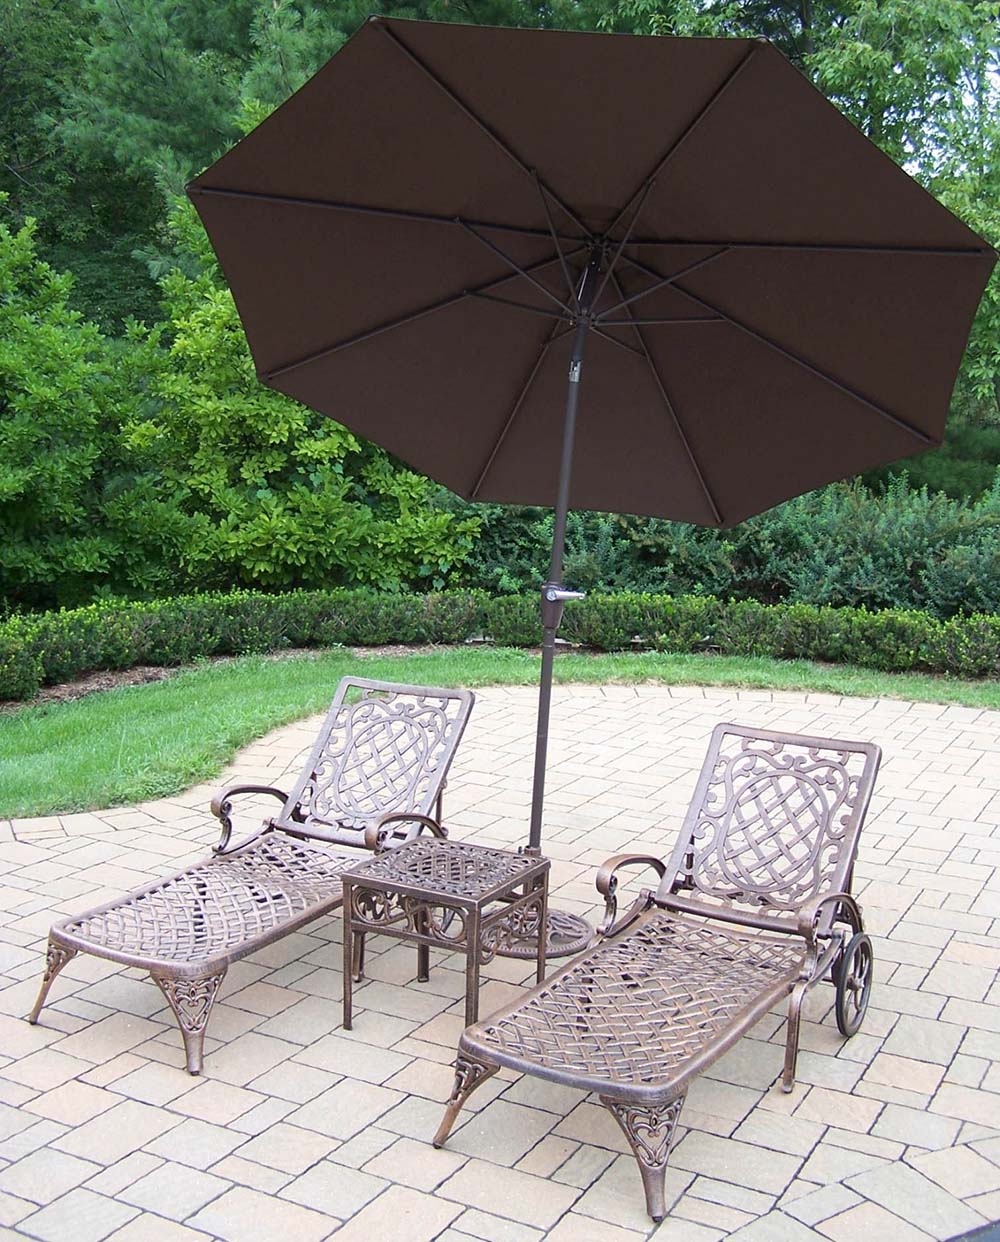 Mississippi Chaise Lounge With Table, Umbrella & Stand